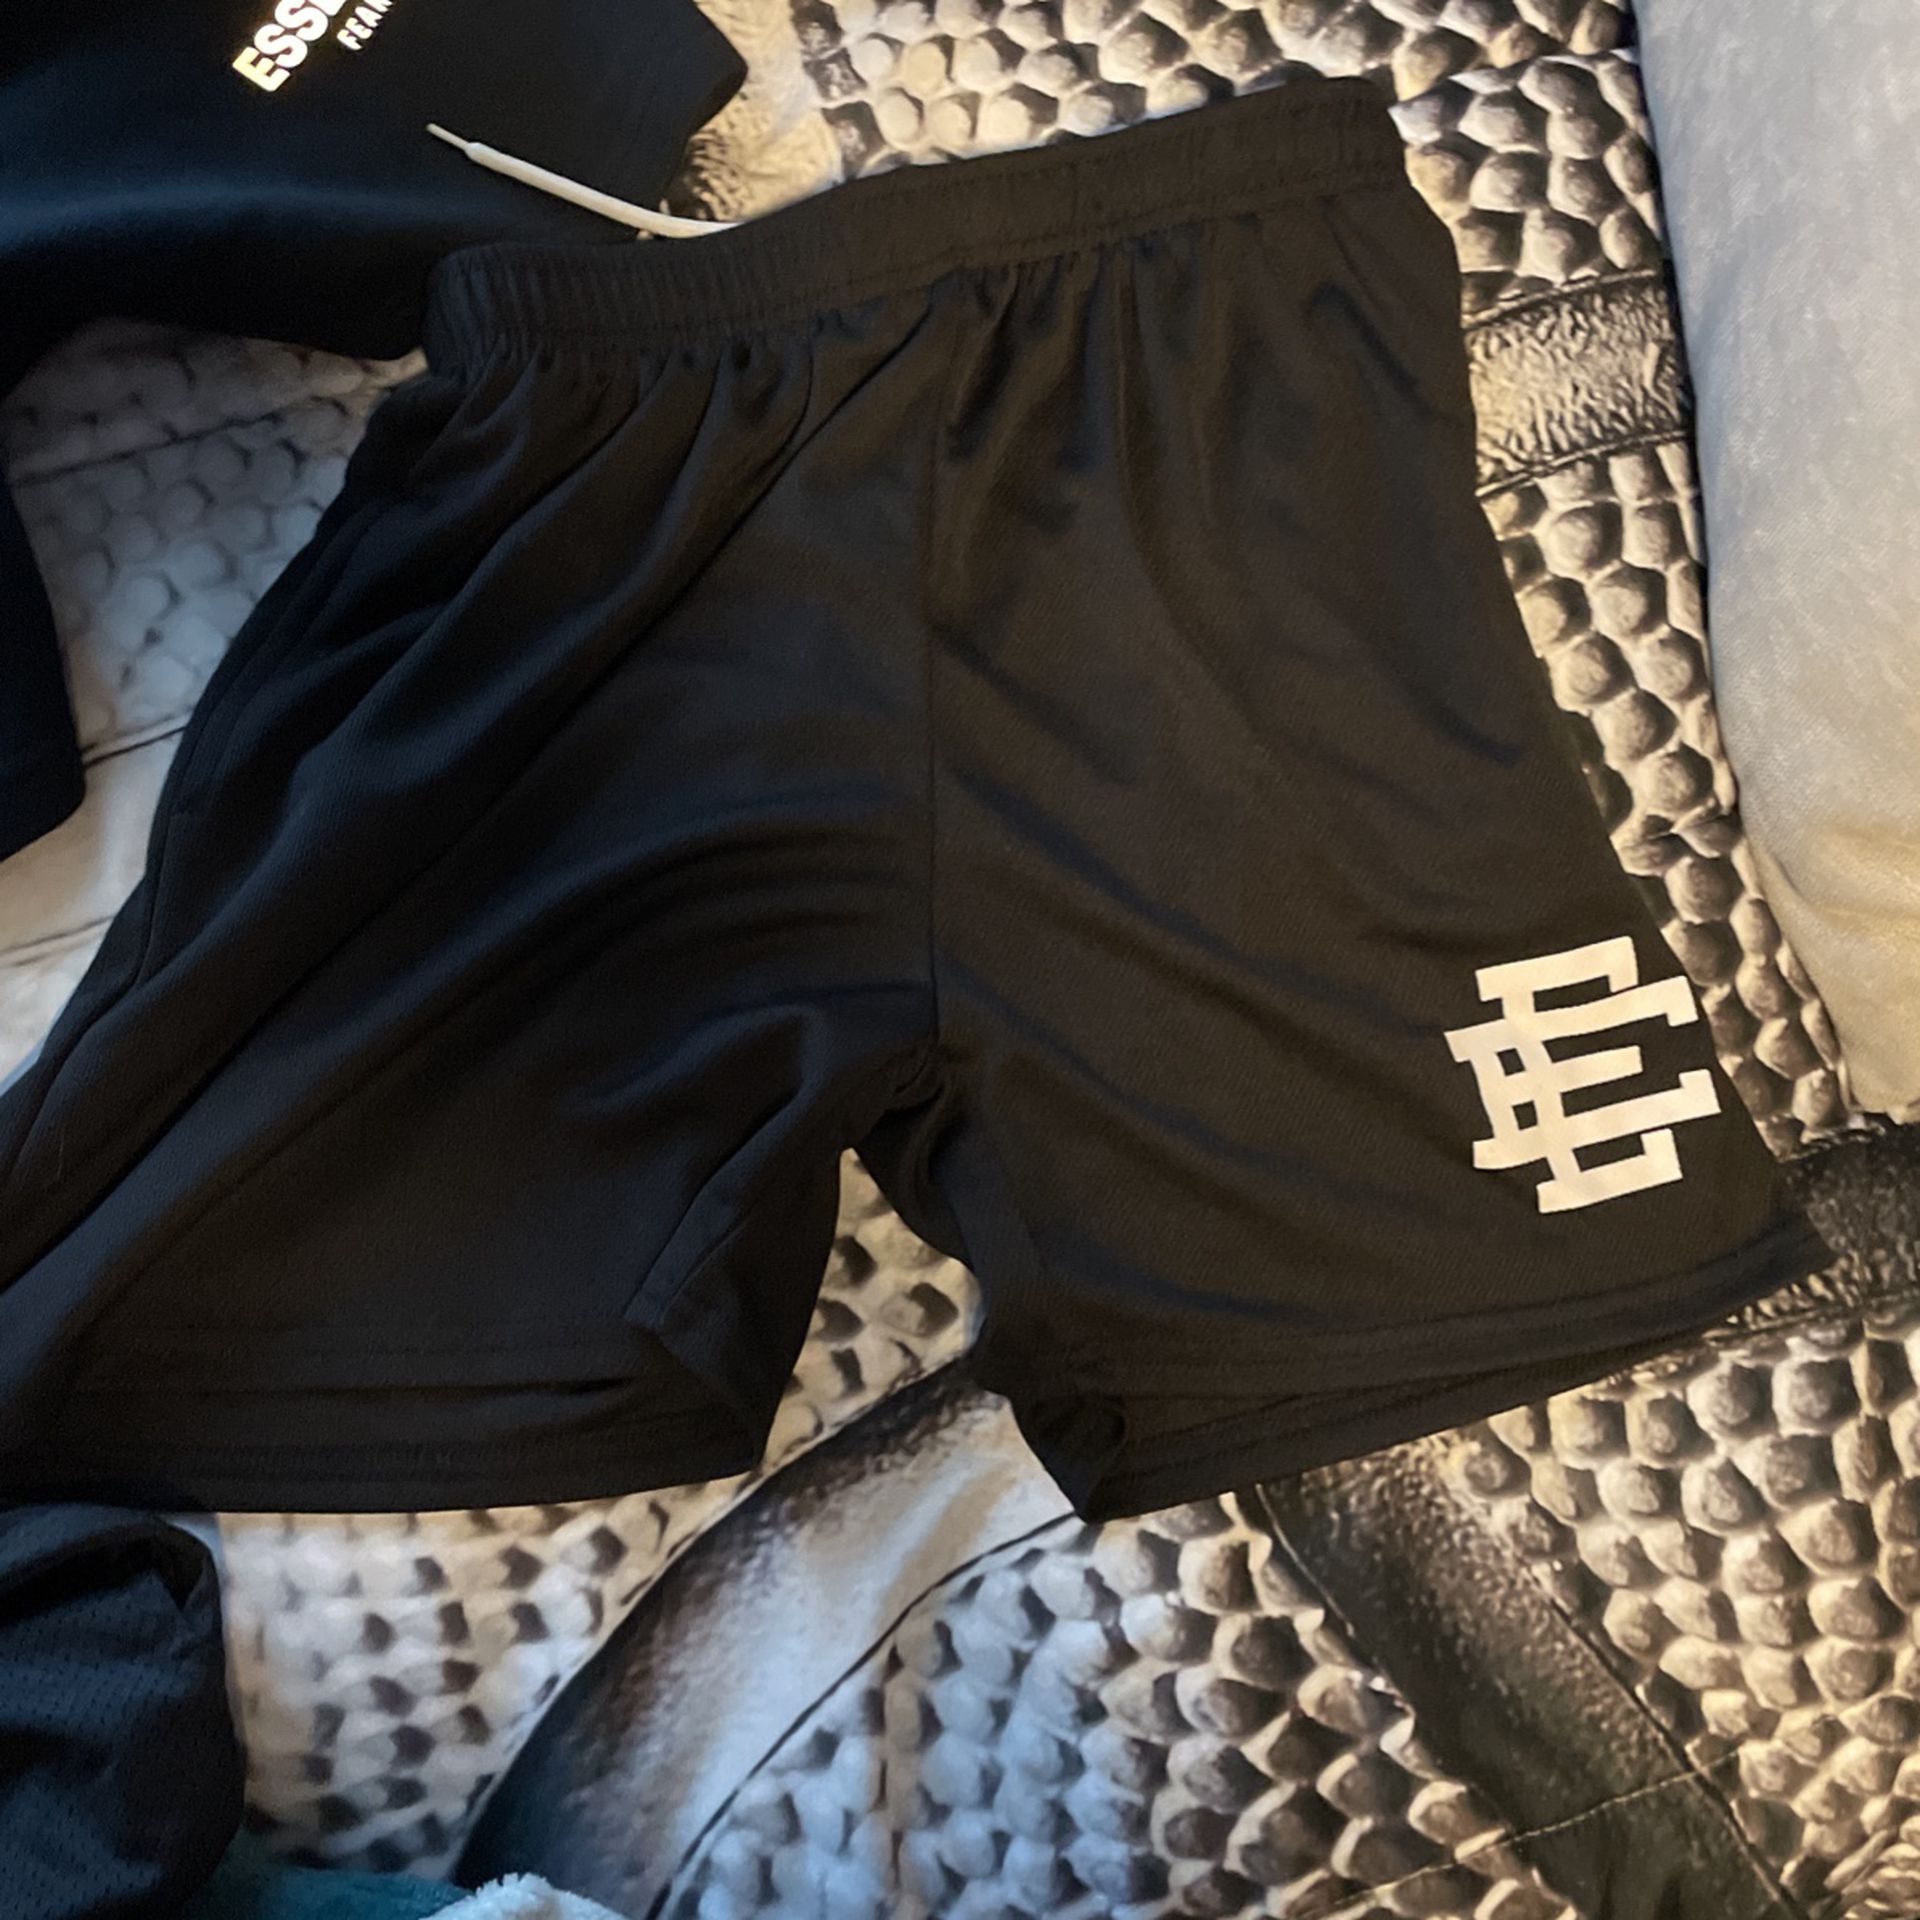 EE shorts Size m